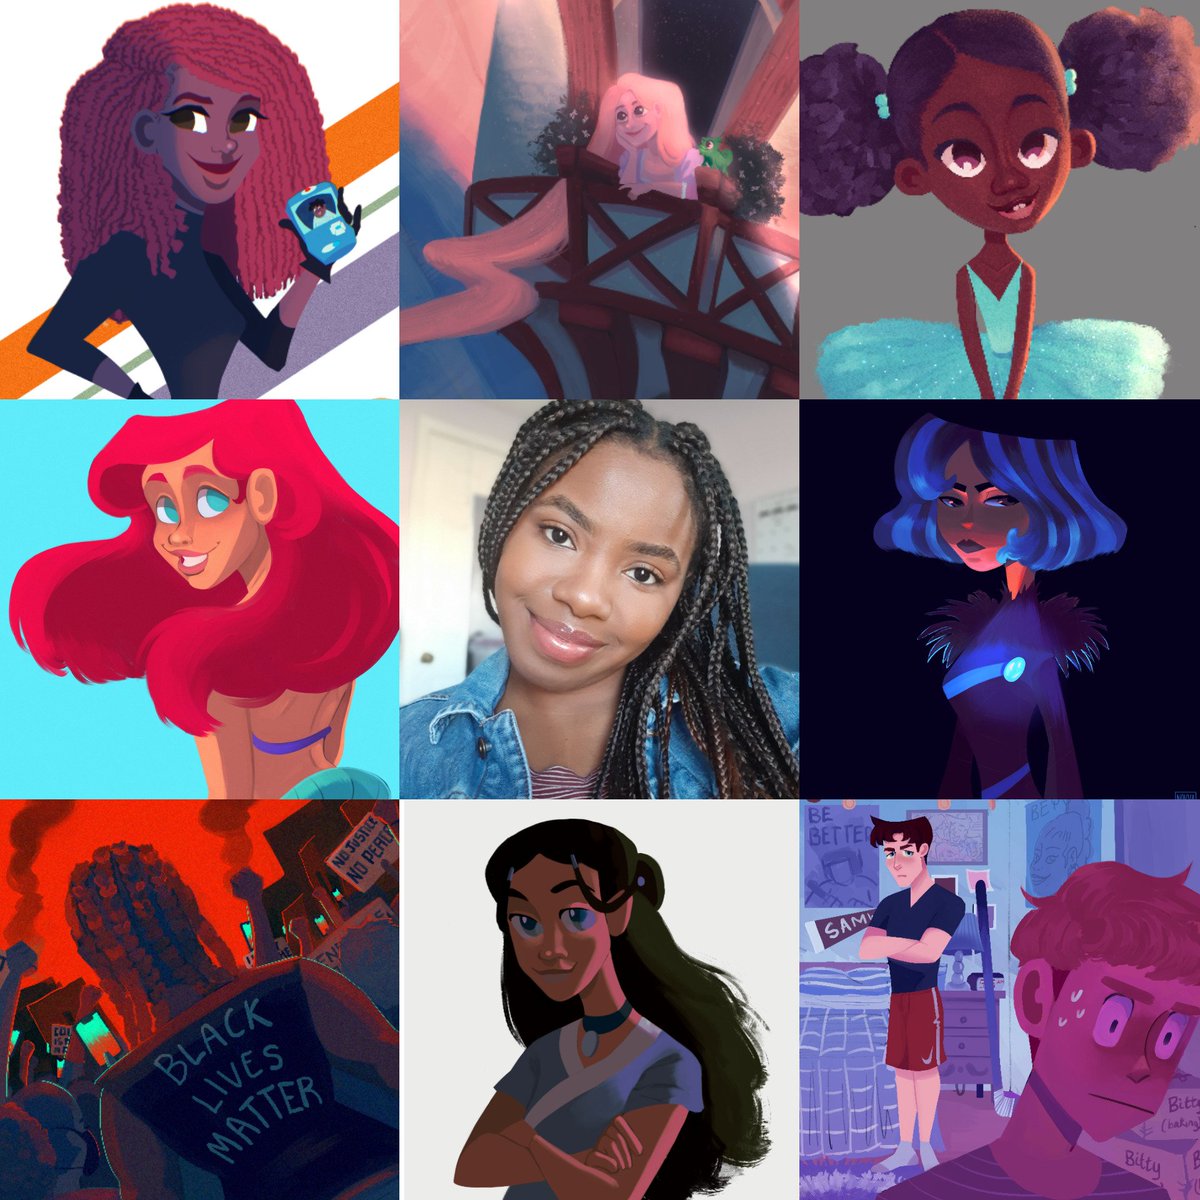 Hey #PortfolioDay ! I'm Lily and I'm an illustrator and student in the DMV area. Currently looking for rep and freelance work in illustration and comics!

?: https://t.co/N7wIMGM2Jq
?: https://t.co/YlRB9LDLnq 